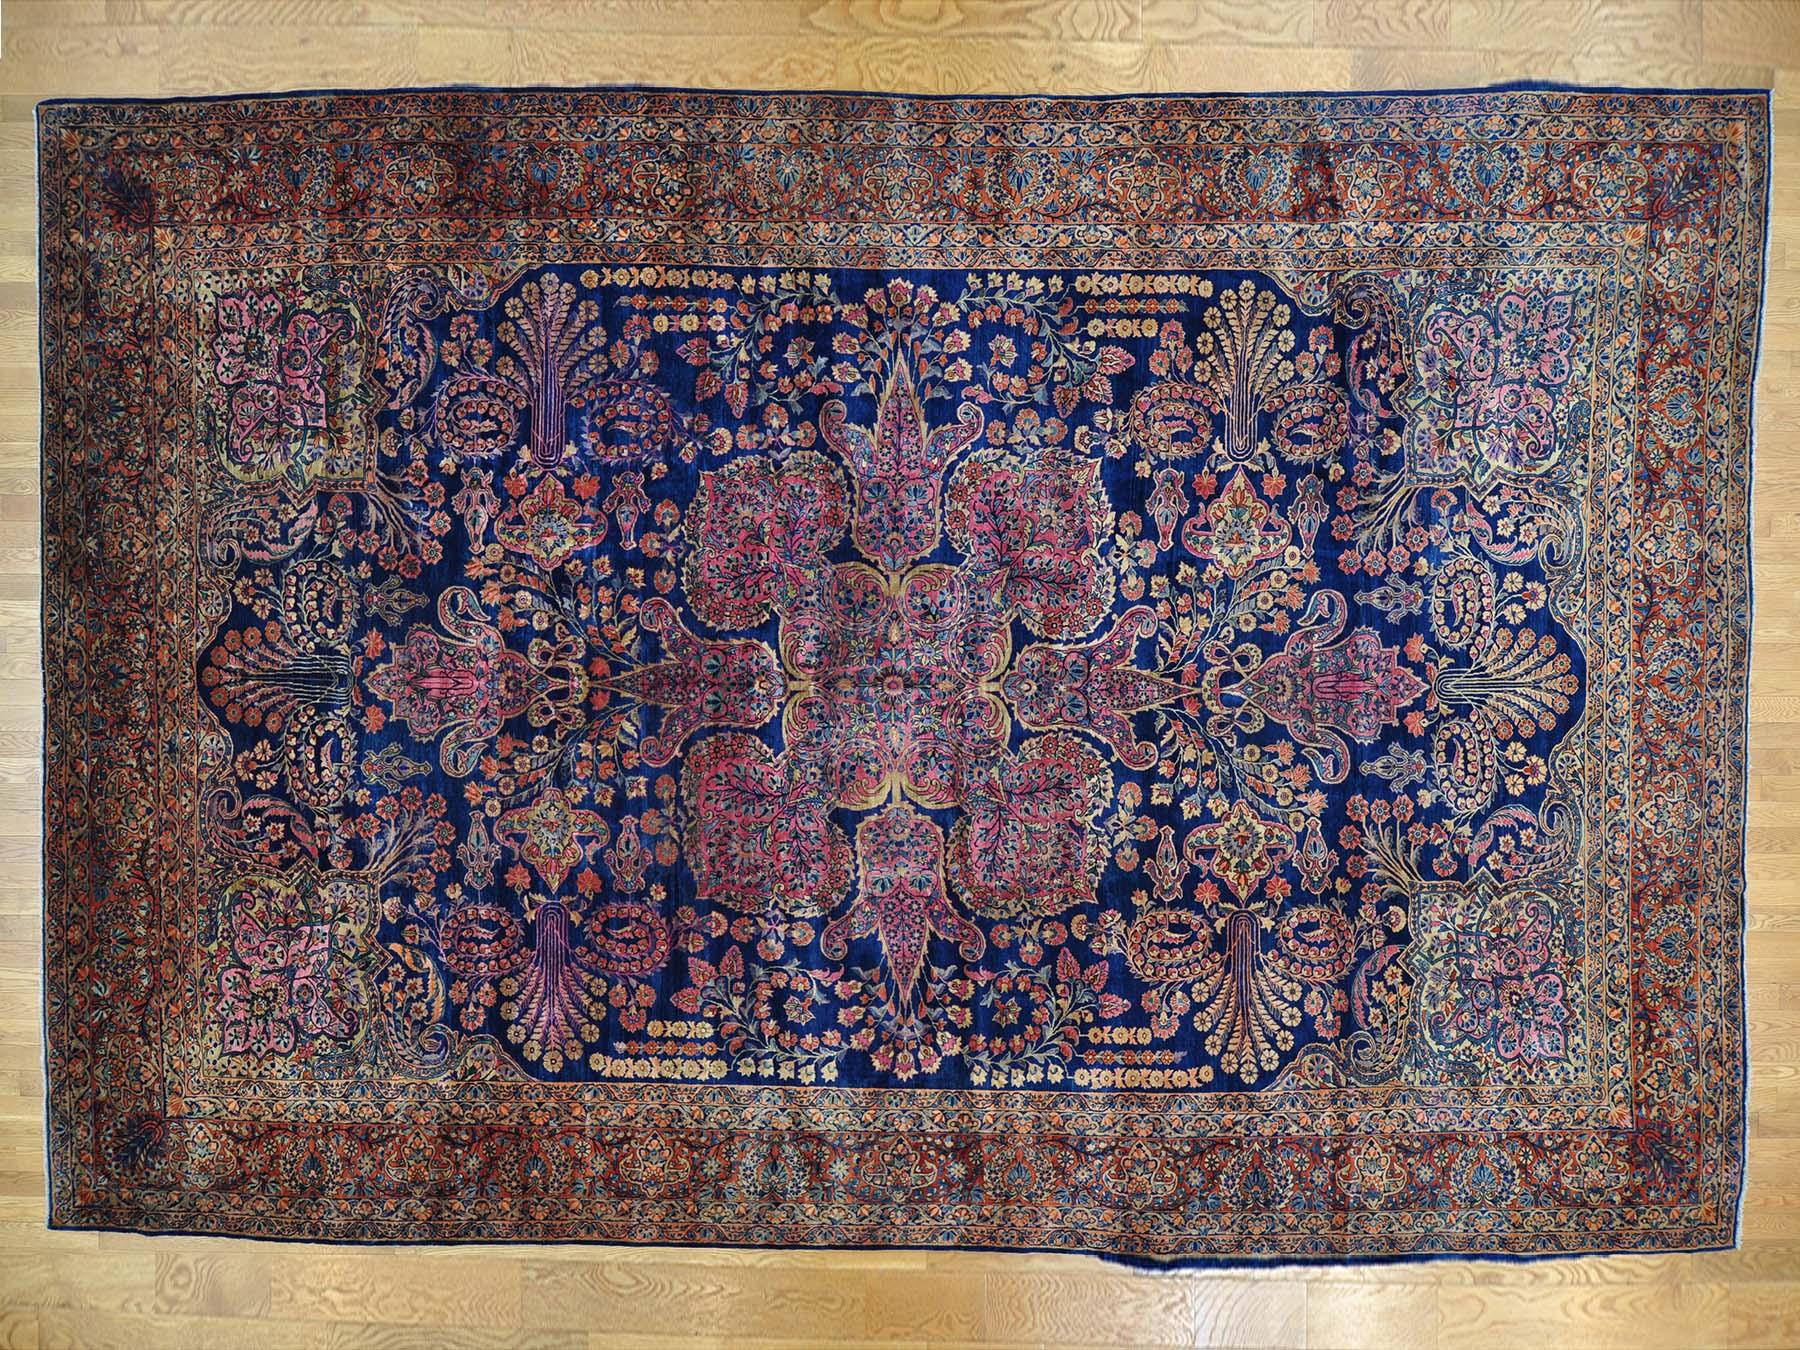 This is a Genuine Hand Knotted Oriental rug. It is not Hand Tufted or Machine Made rug. Our entire inventory is made of either Hand Knotted or Handwoven rugs.

Decorate your home with this high quality antique carpet. This handcrafted Persian